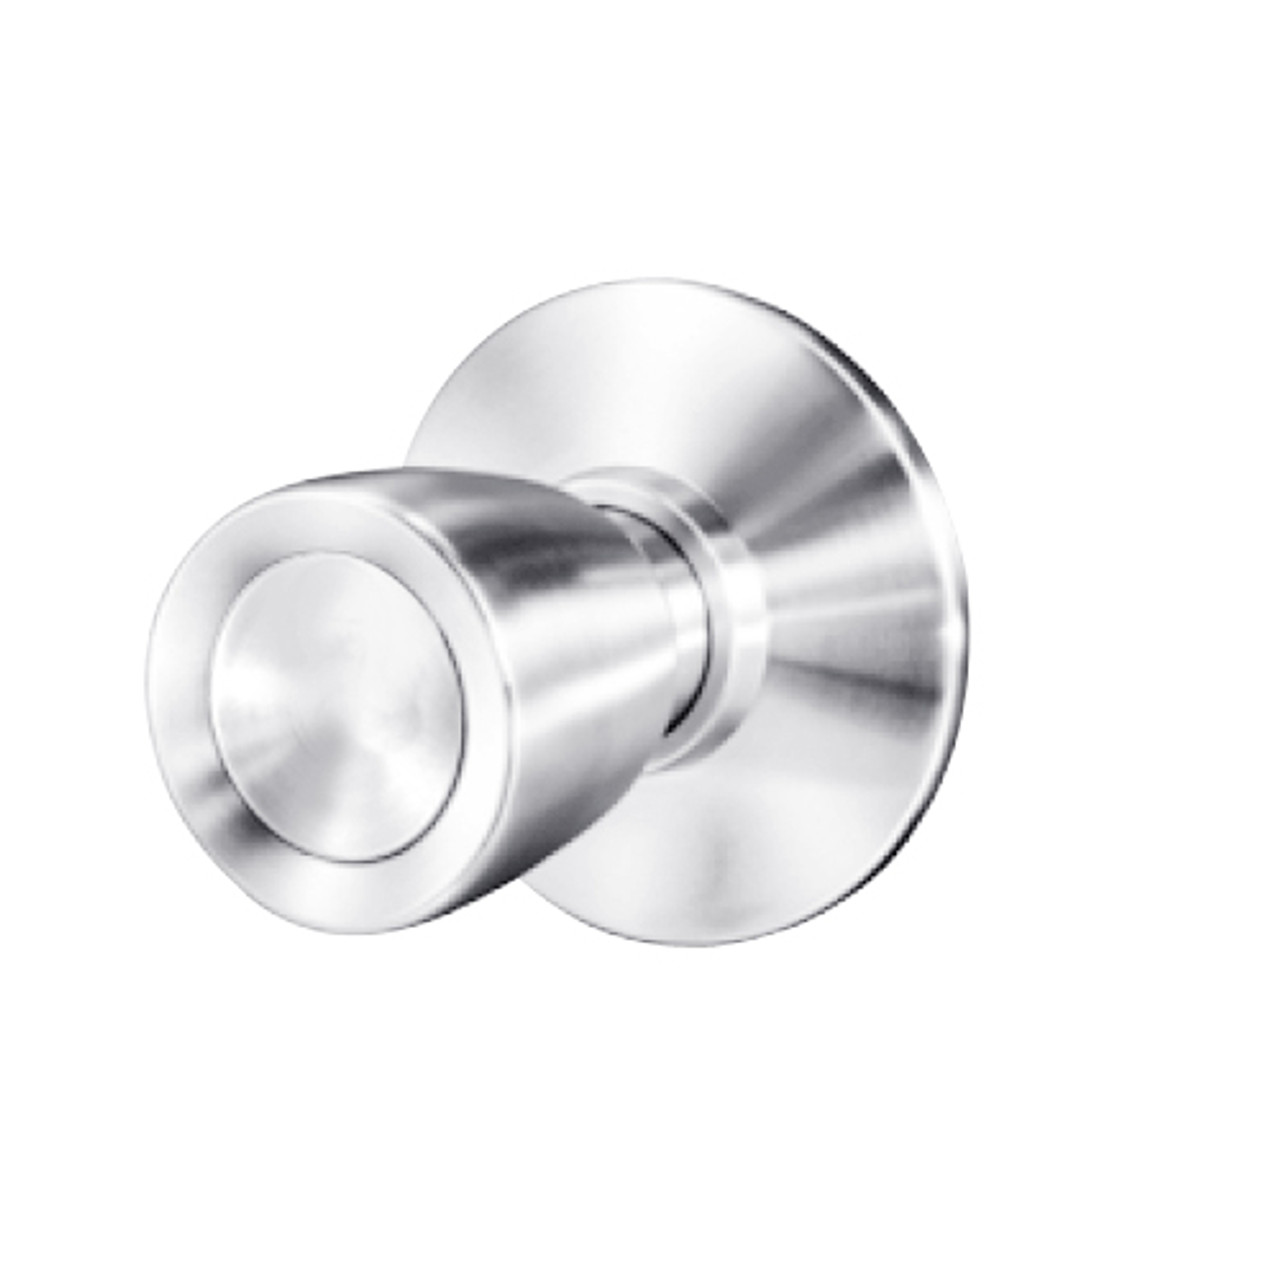 8K30NX6DS3625 Best 8K Series Exit Heavy Duty Cylindrical Knob Locks with Tulip Style in Bright Chrome